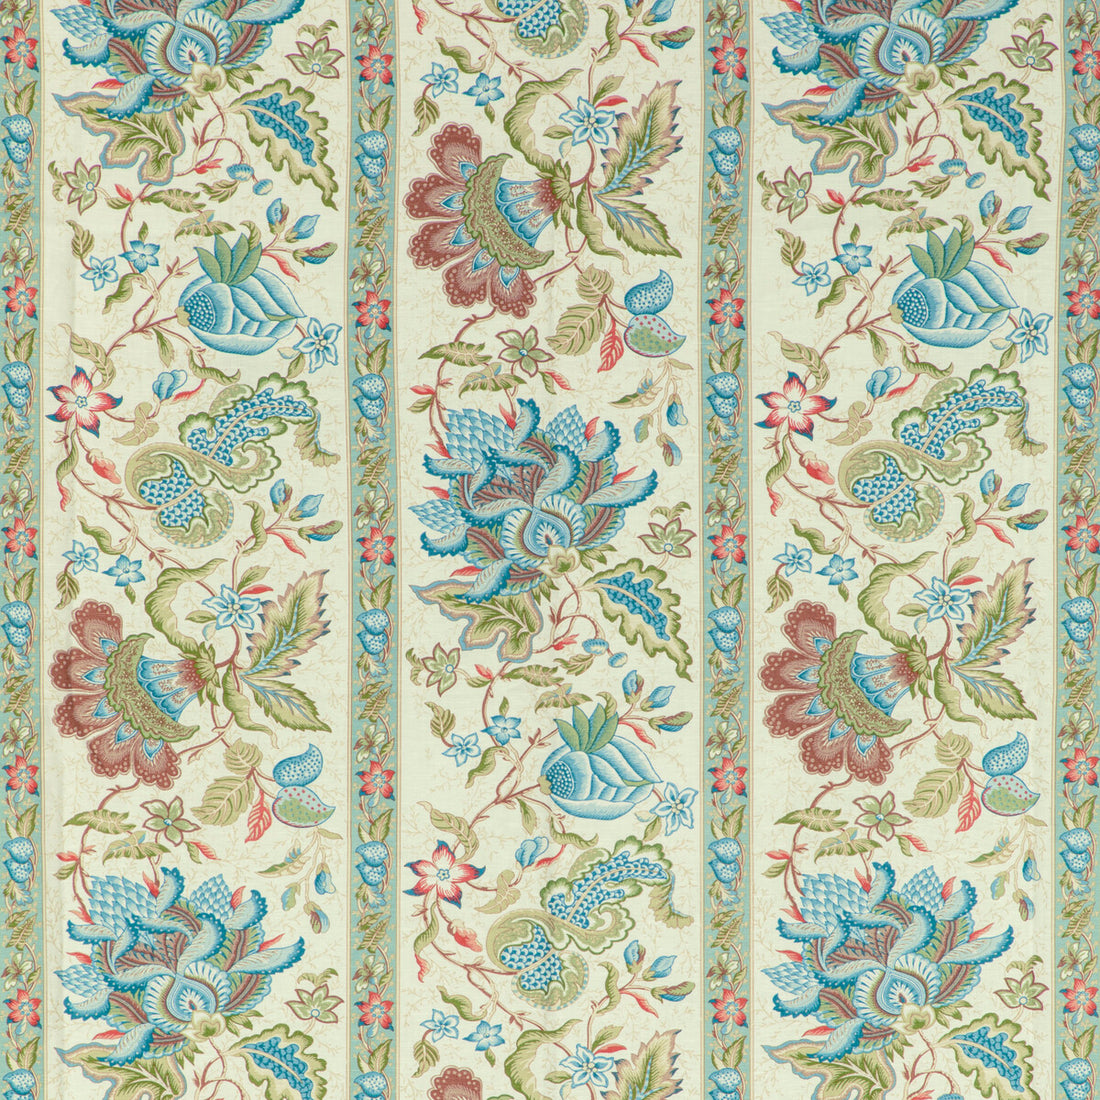 Montflours Print fabric in multi color - pattern 8020120.137.0 - by Brunschwig &amp; Fils in the Louverne collection